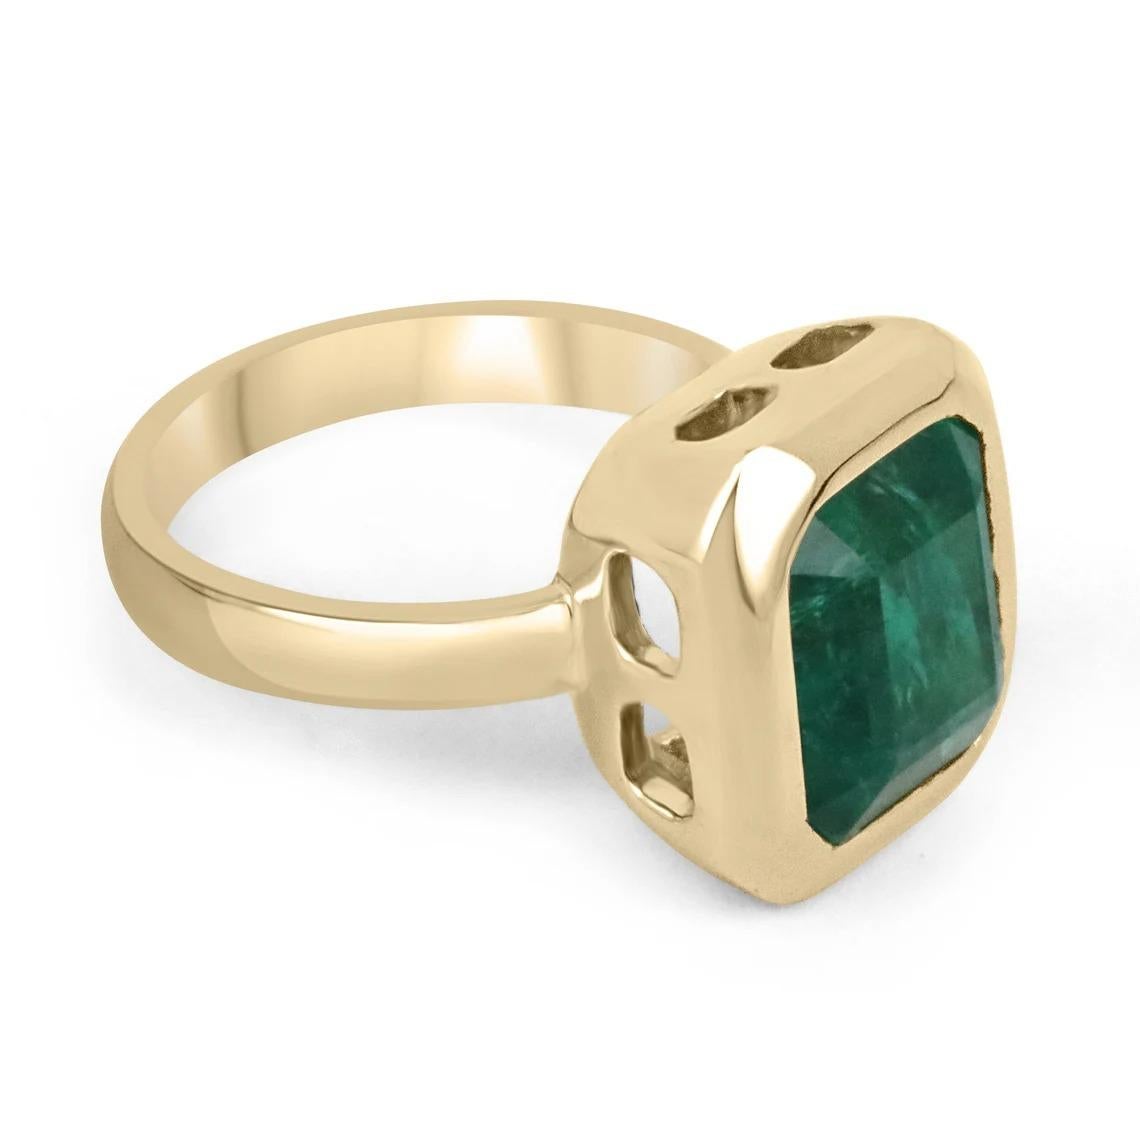 Displayed is a magnificent solitaire emerald engagement or right-hand ring. This lovely piece showcases an impressive 7.58-carat, natural emerald from the origin of Zambia. This mesmerizing stone has the most beautiful and desirable dark forest